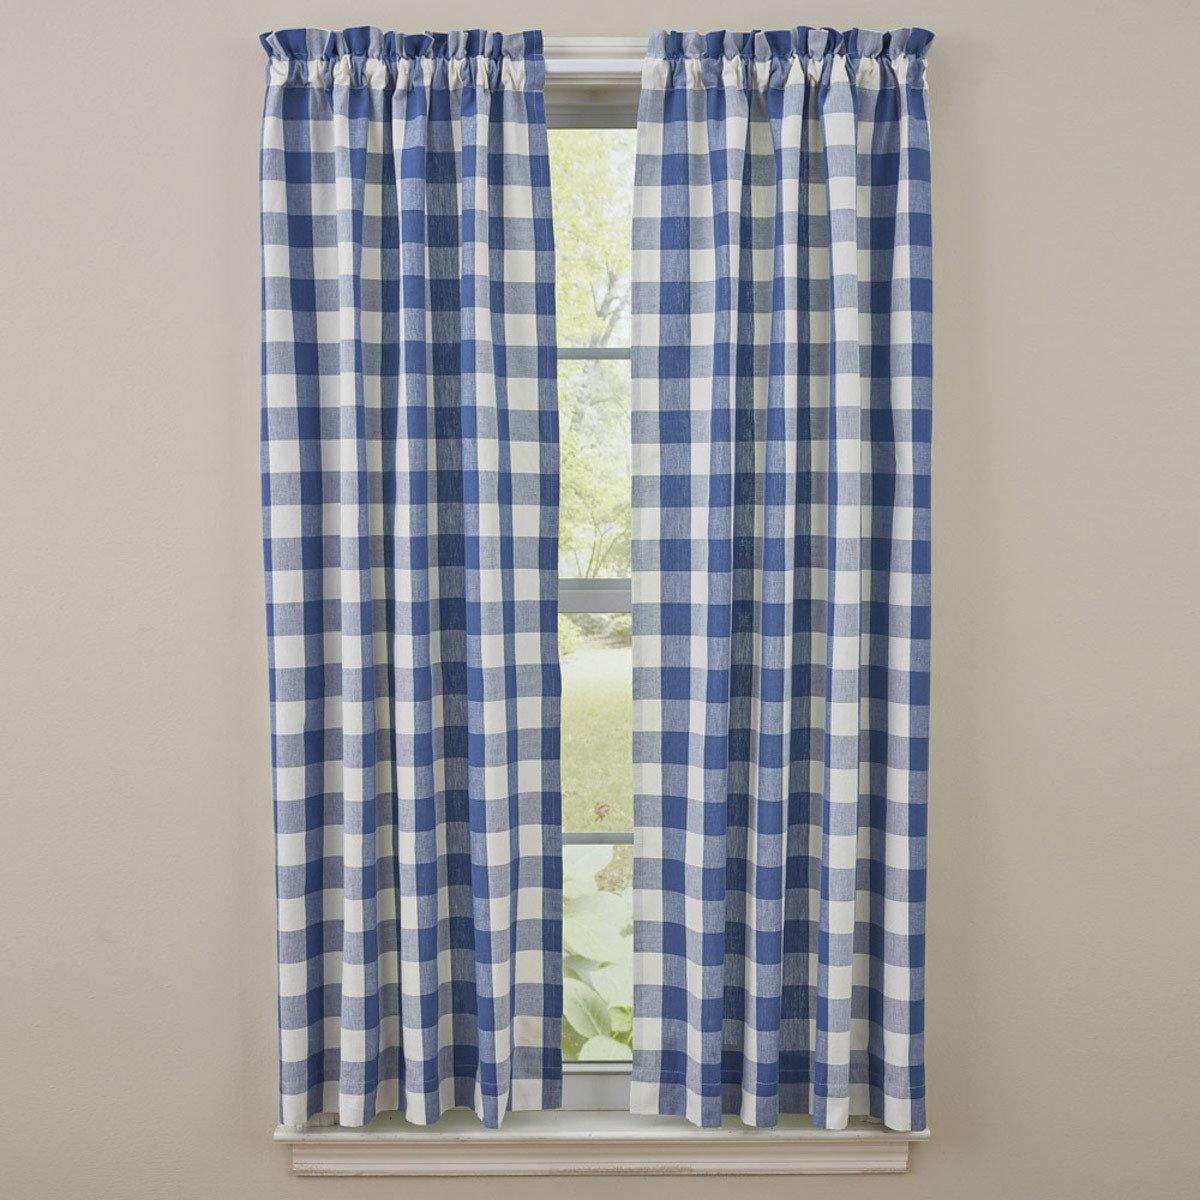 Wicklow Check Curtain Panels - China Blue 72x63 Unlined Park Designs - The Fox Decor